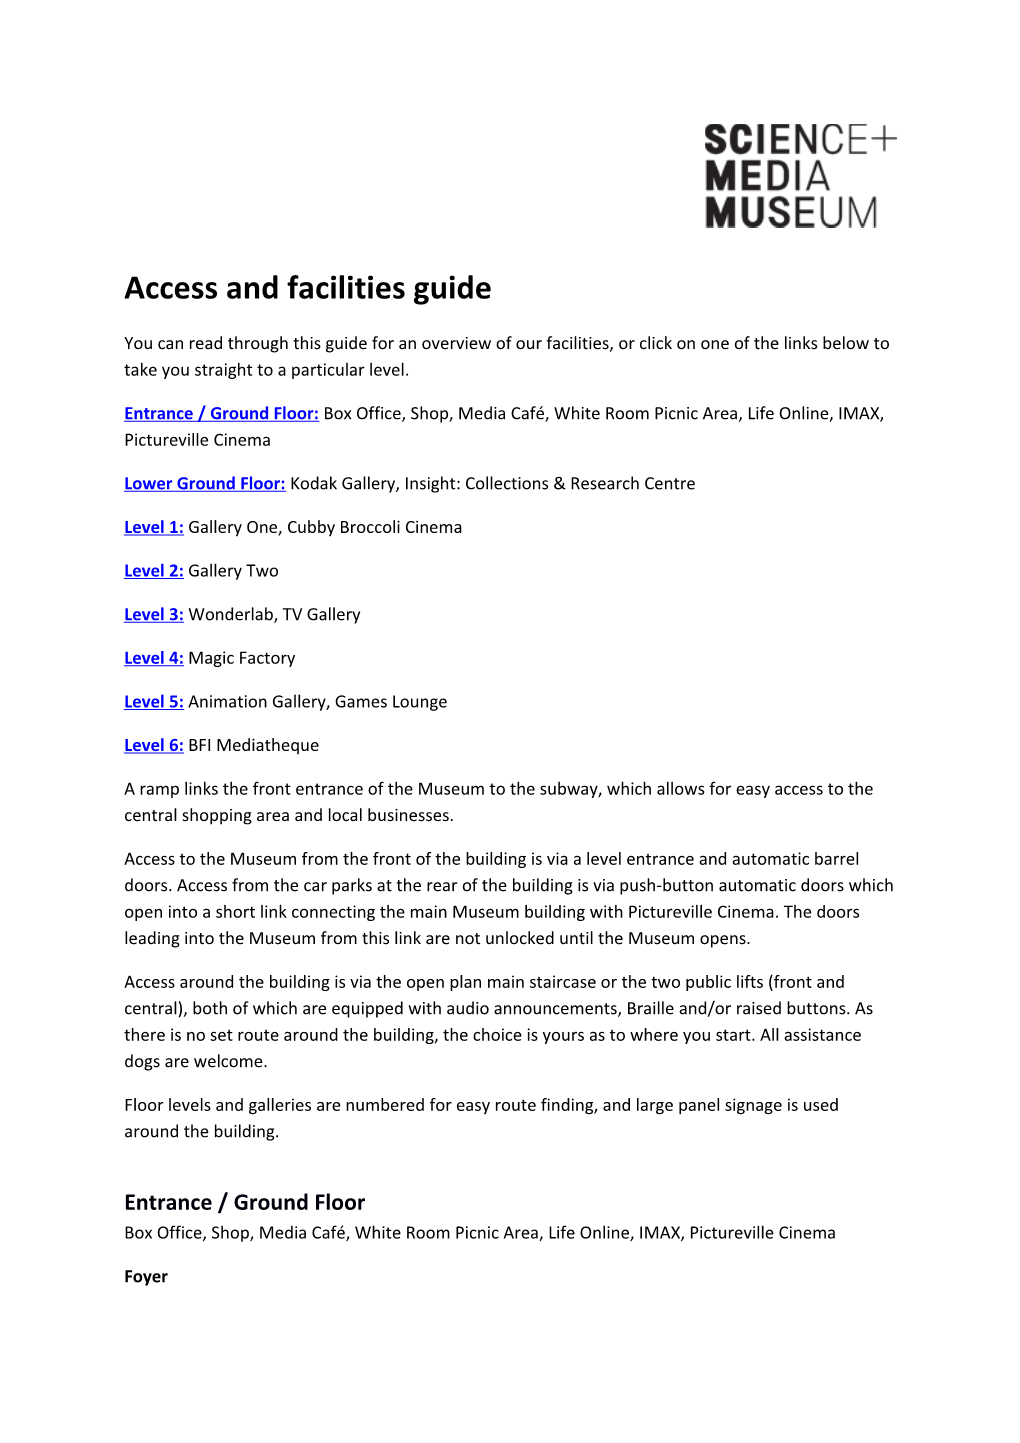 Access and Facilities Guide